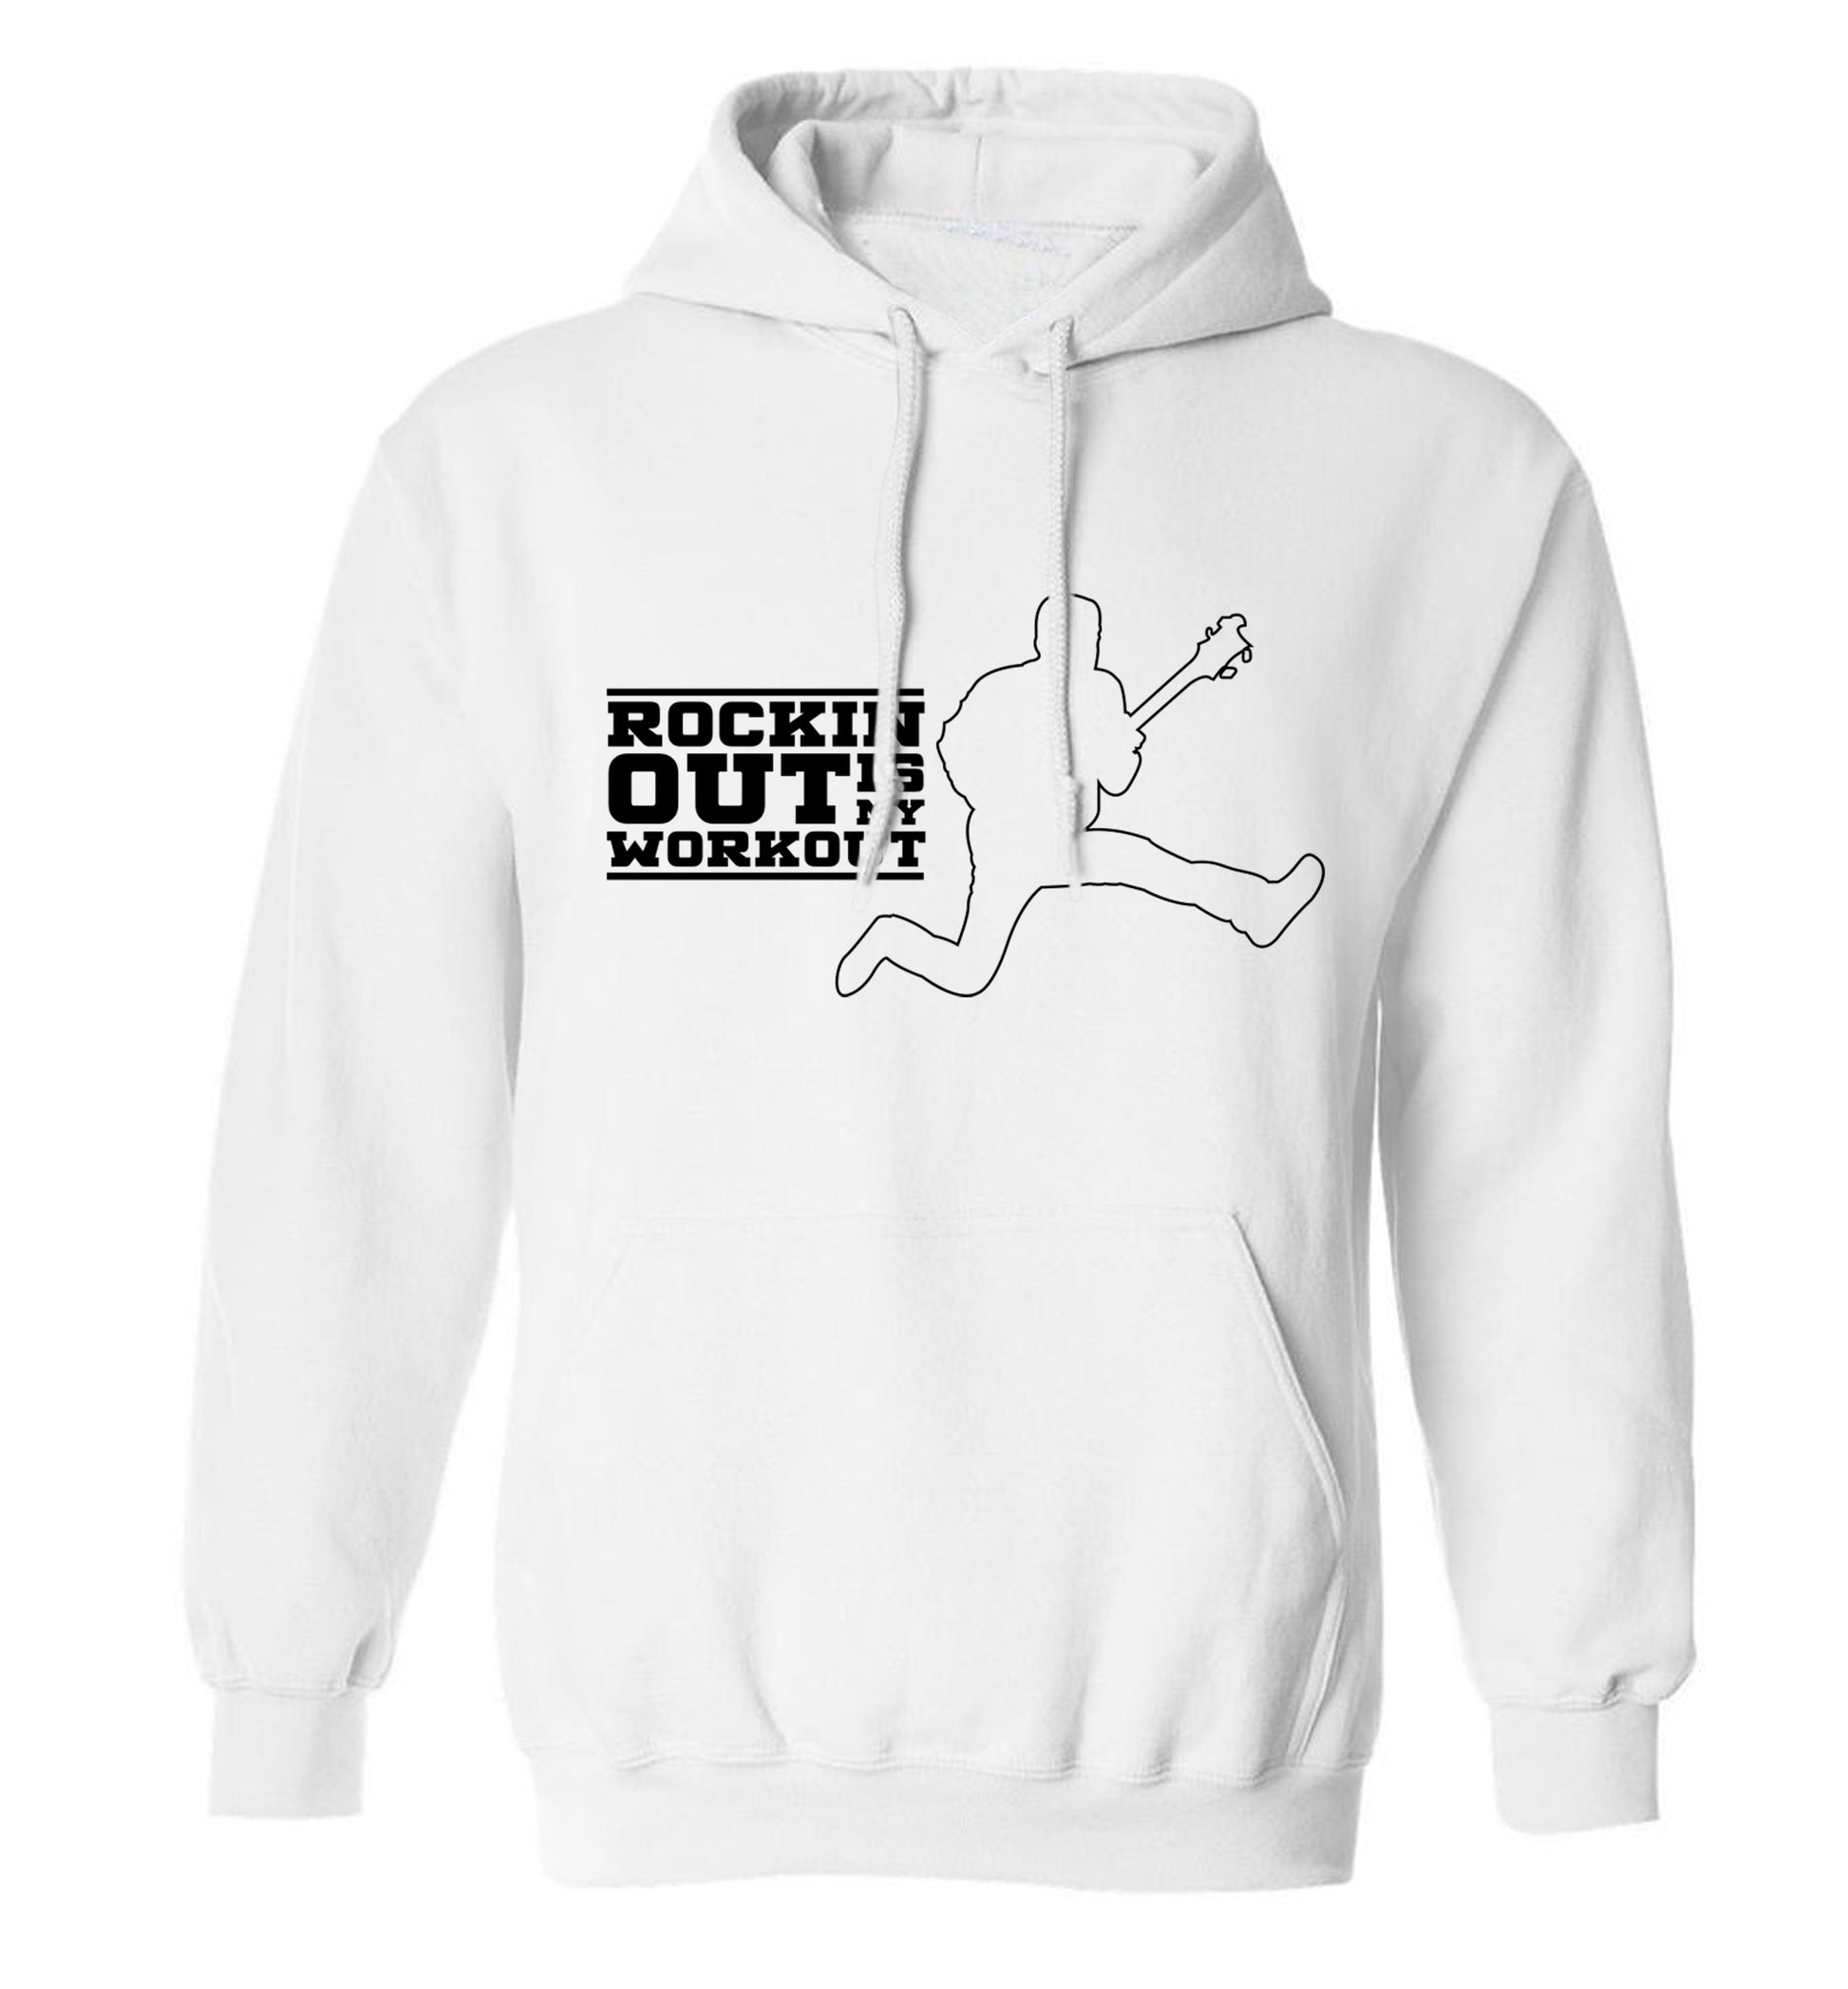 Rockin out is my workout adults unisex white hoodie 2XL